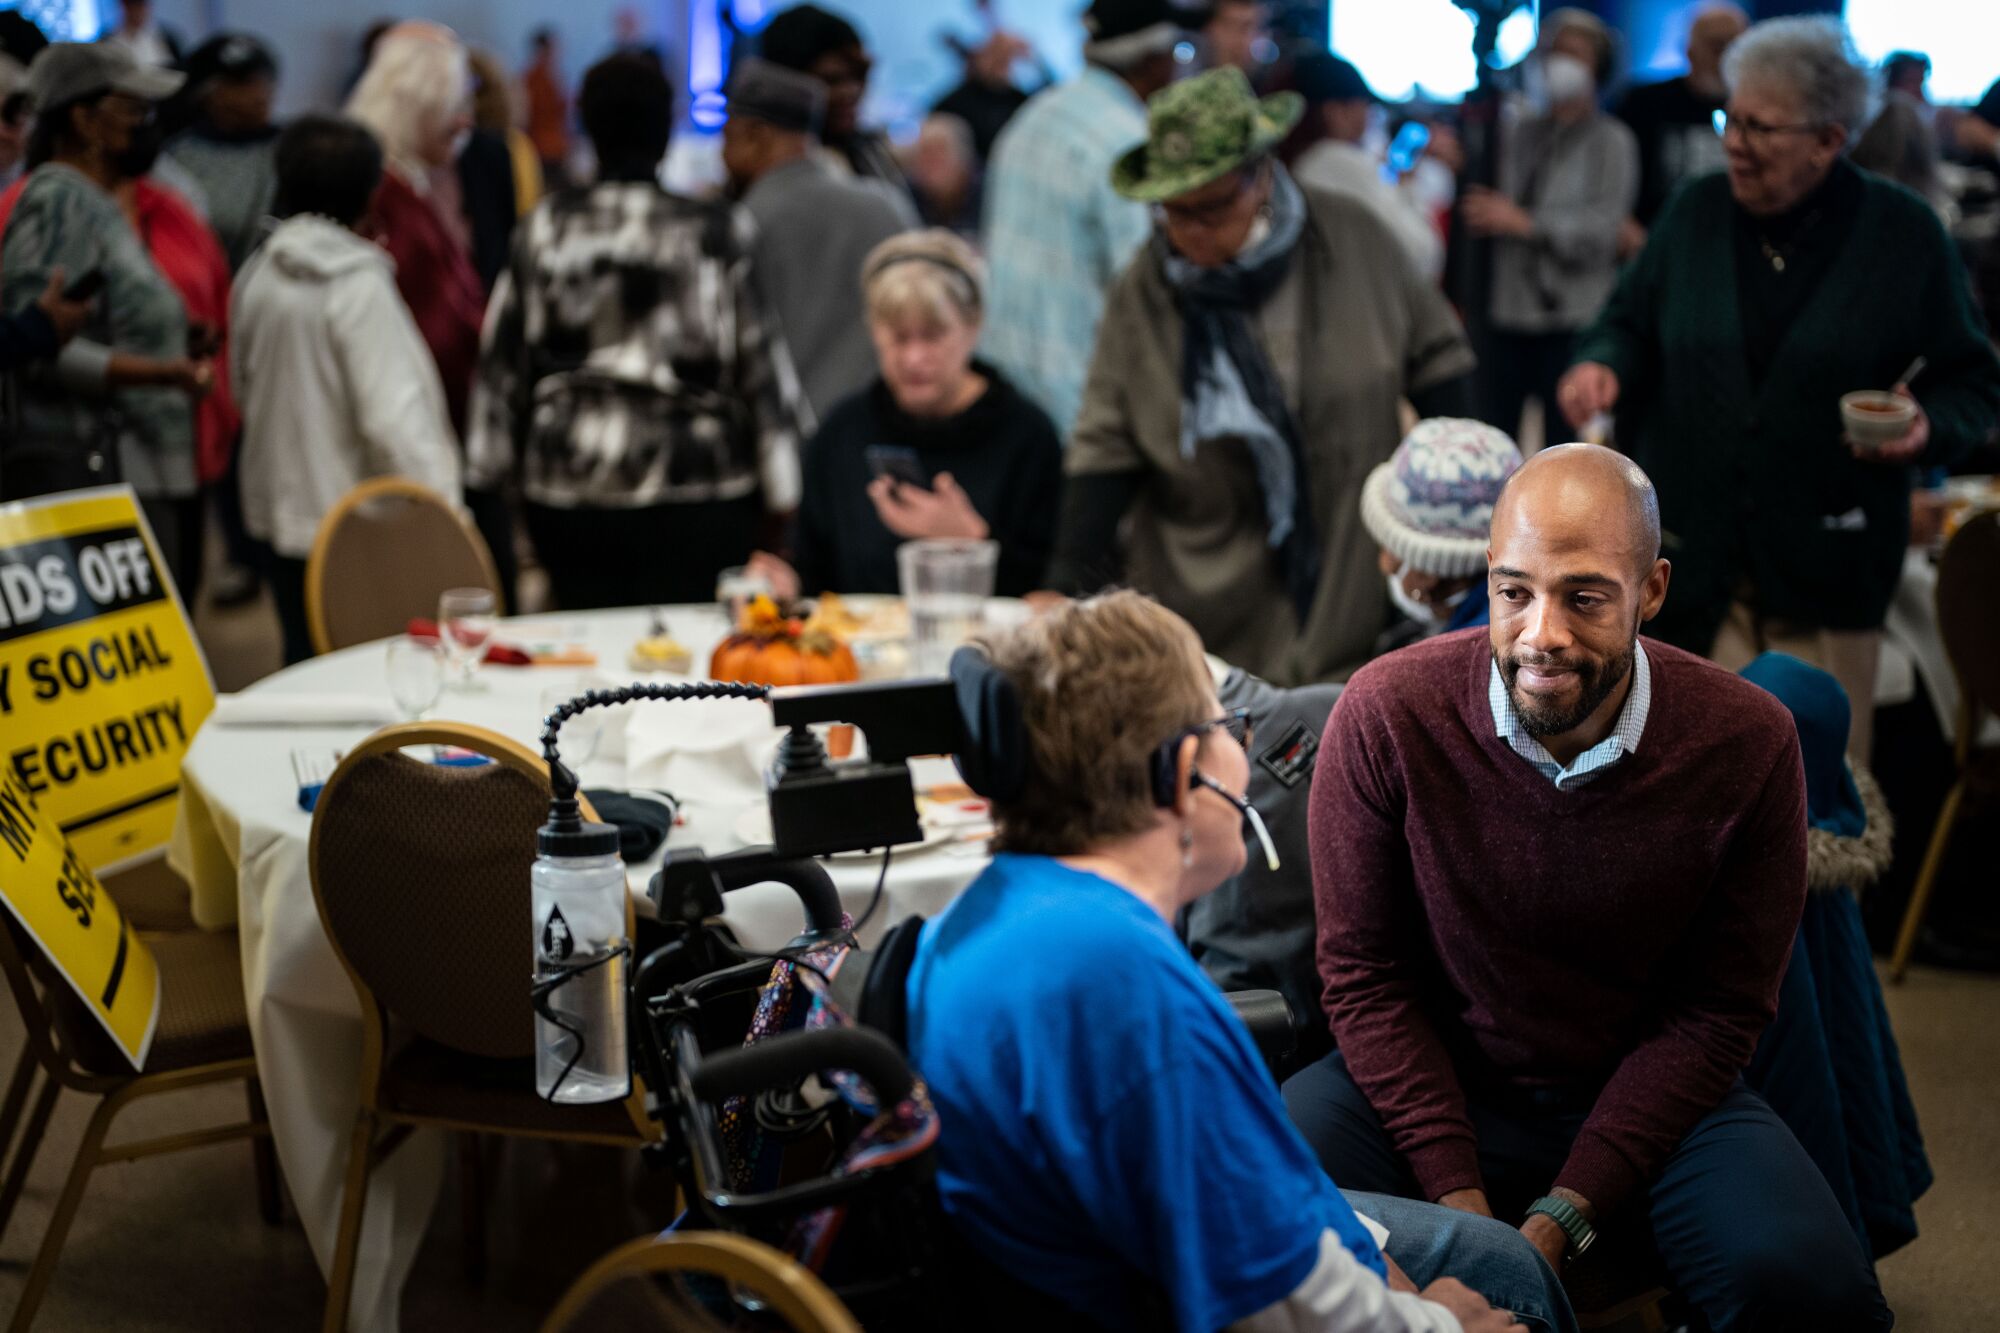 Democratic candidate for U.S. Senate Mandela Barnes greets attendees at a "Fish Fry to Save Social Security" event 